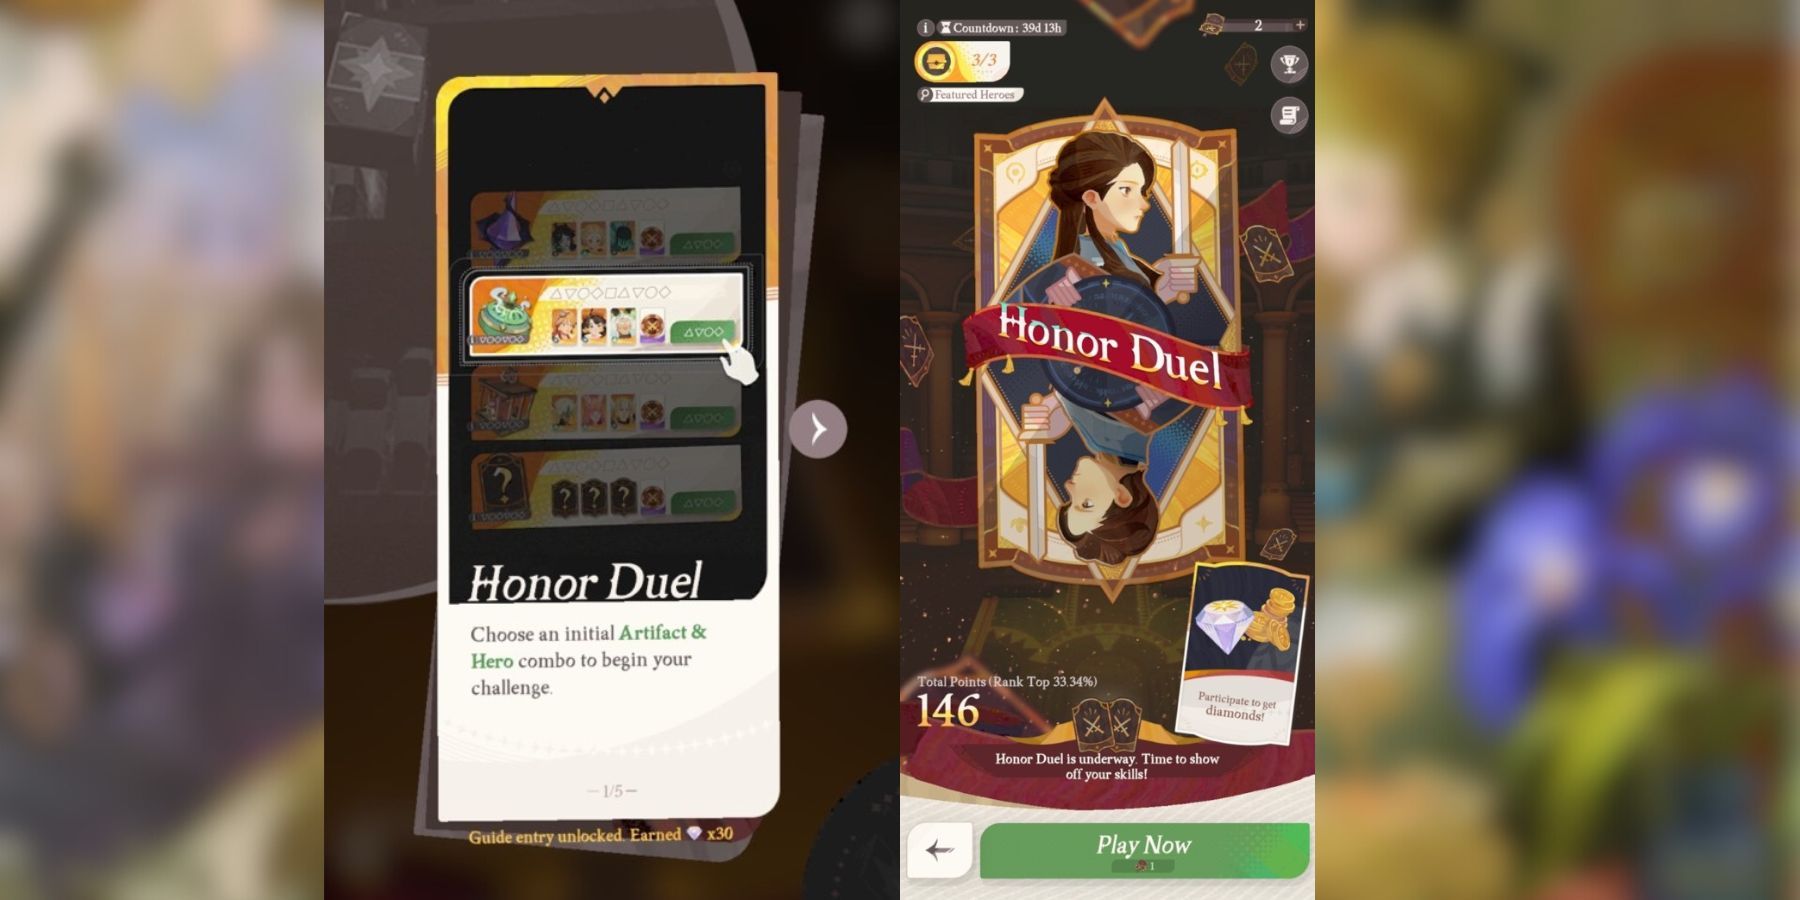 honor duel mode in afk journey.